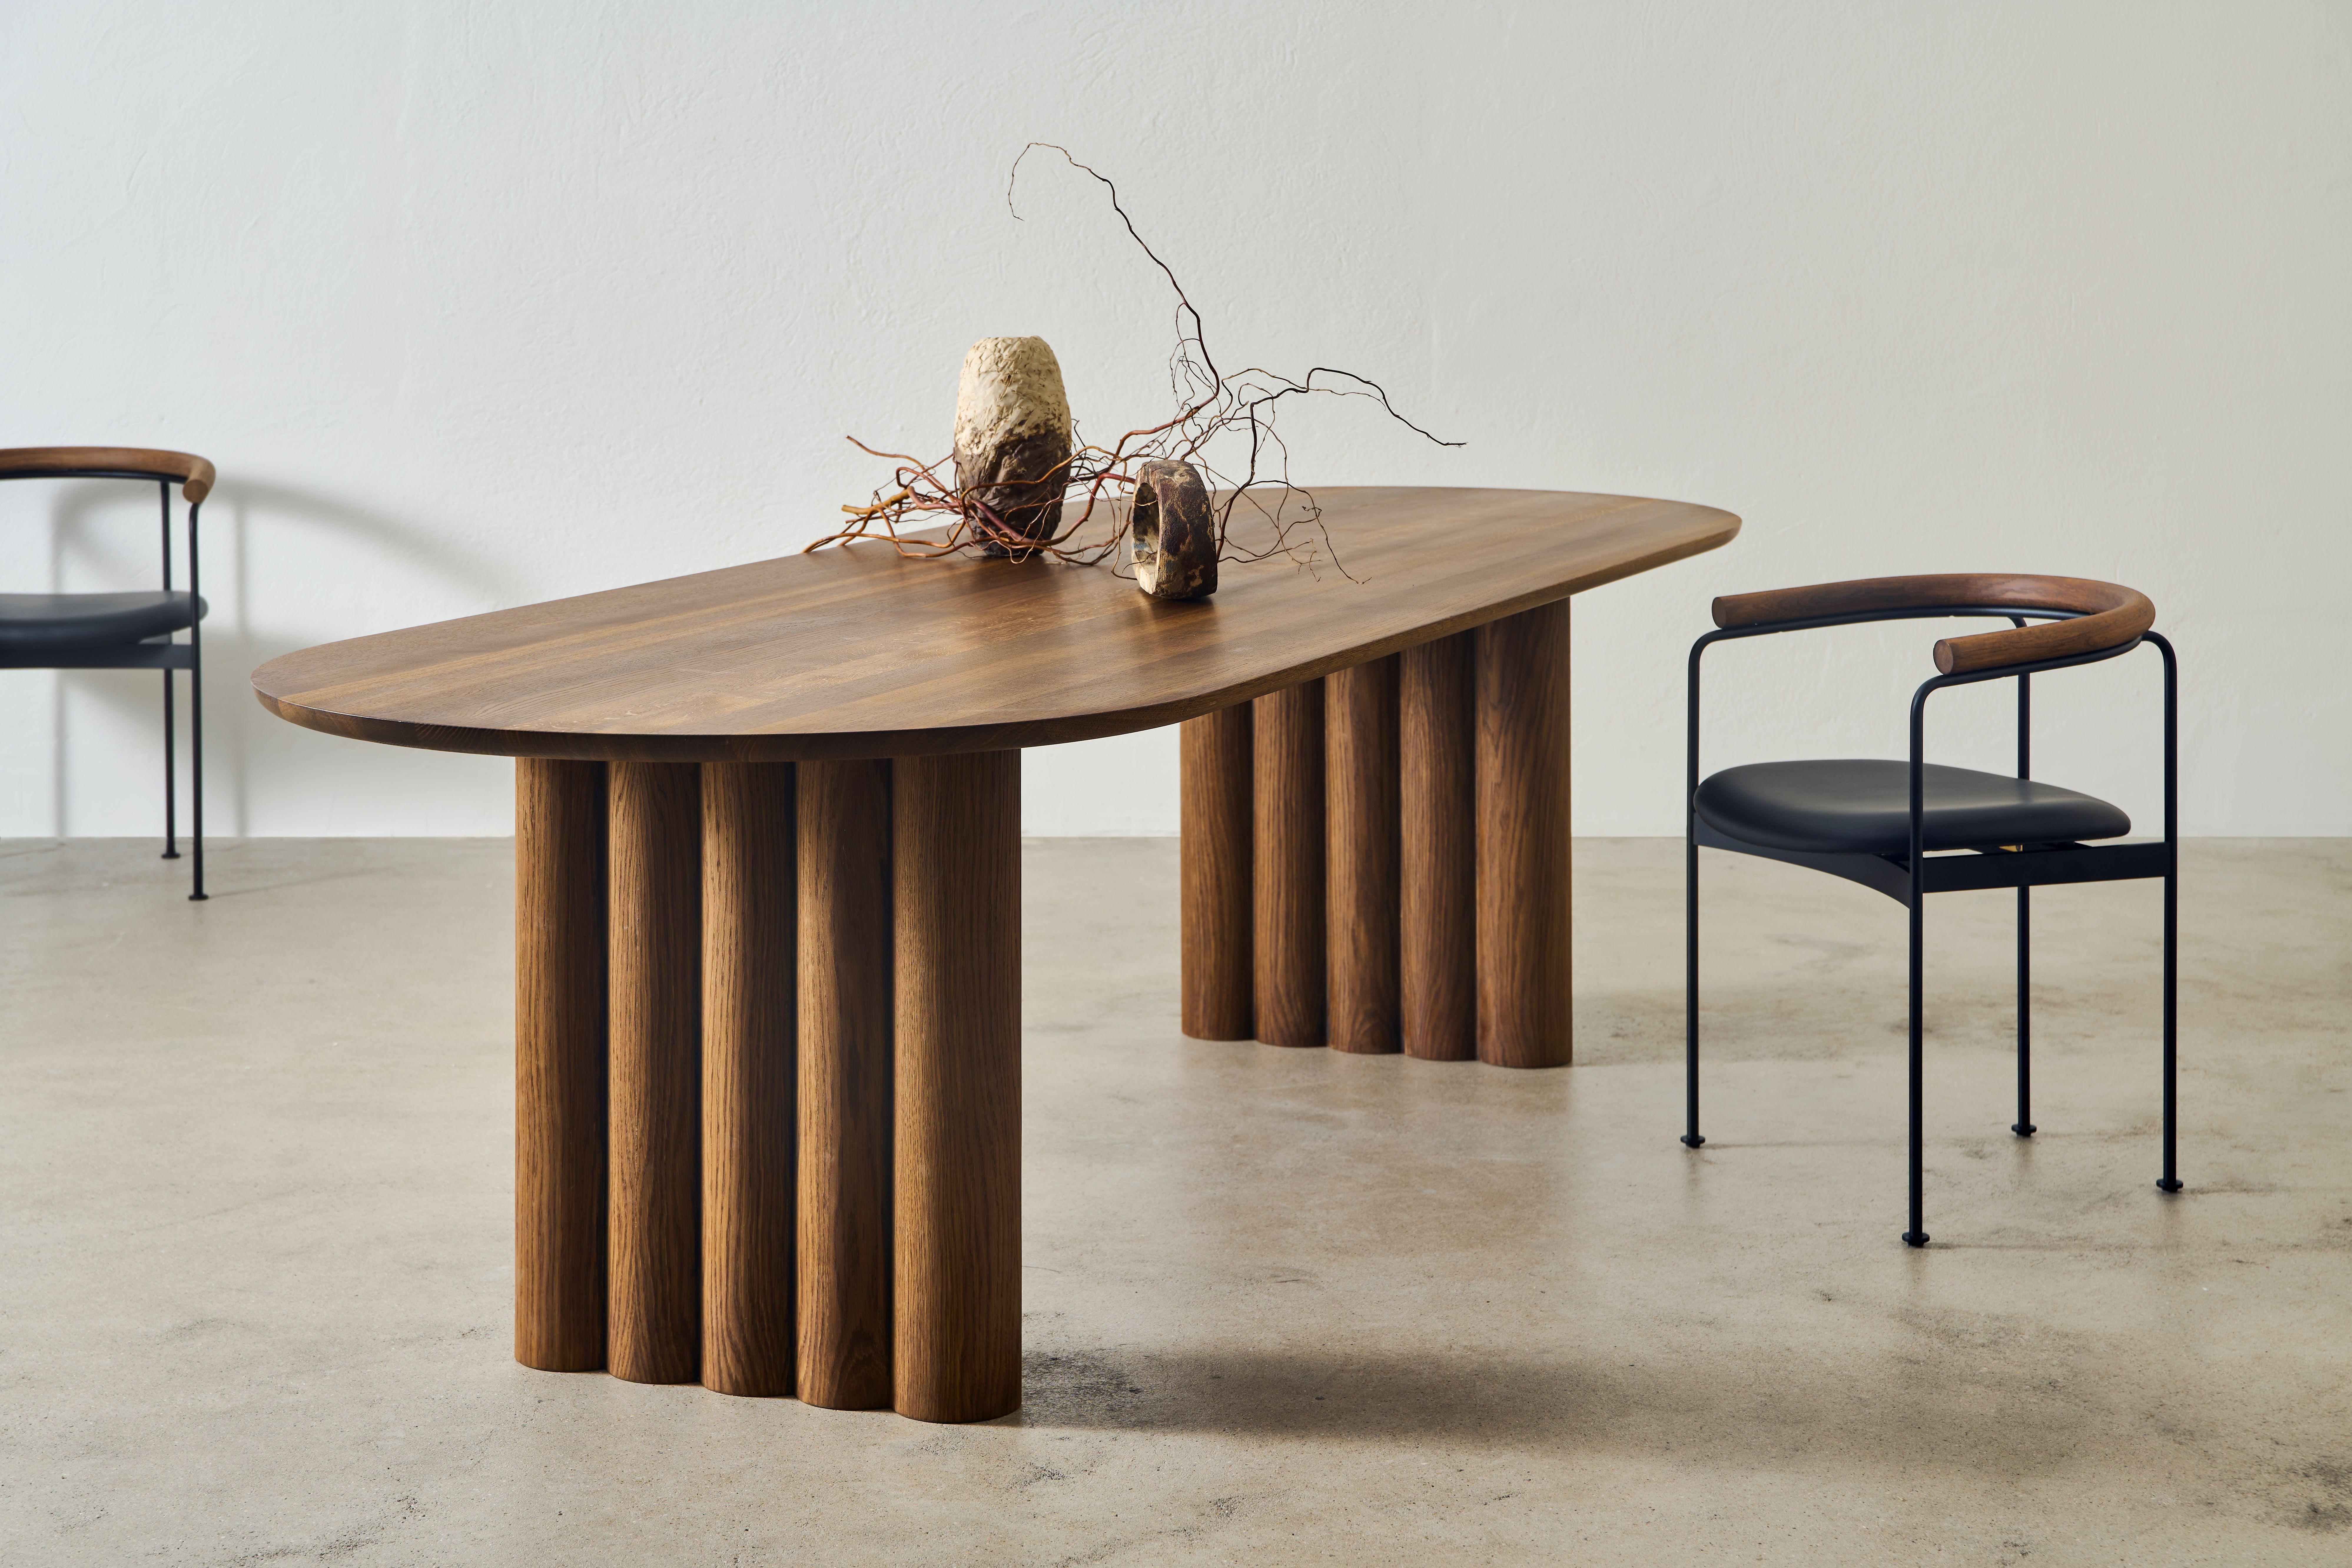 PLUSH dining table, oval, 200 cm.
Solid wood table top and legs. Handmade in Denmark. 
Signed by Jacob Plejdrup for DK3

Table's height: 72 or 74 cm
Table top’s thickness: 30-40mm
Legs width: 130mm or 150mm

Table top dimensions:
– 200 x